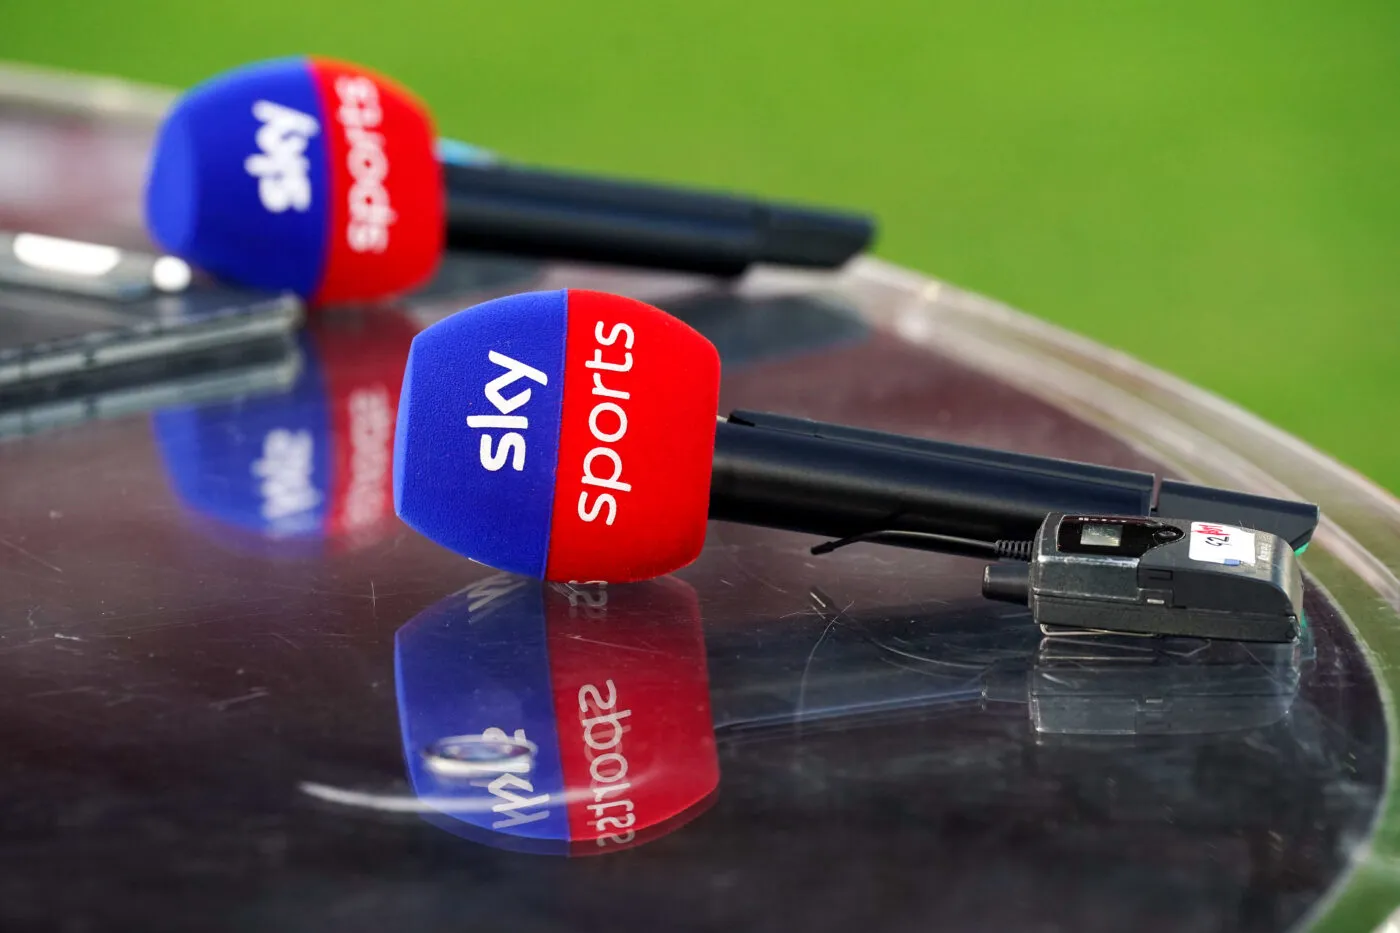 Sky Sports microphones ahead of the Premier League match at The City Ground, Nottingham. Picture date: Friday March 17, 2023. - Photo by Icon sport